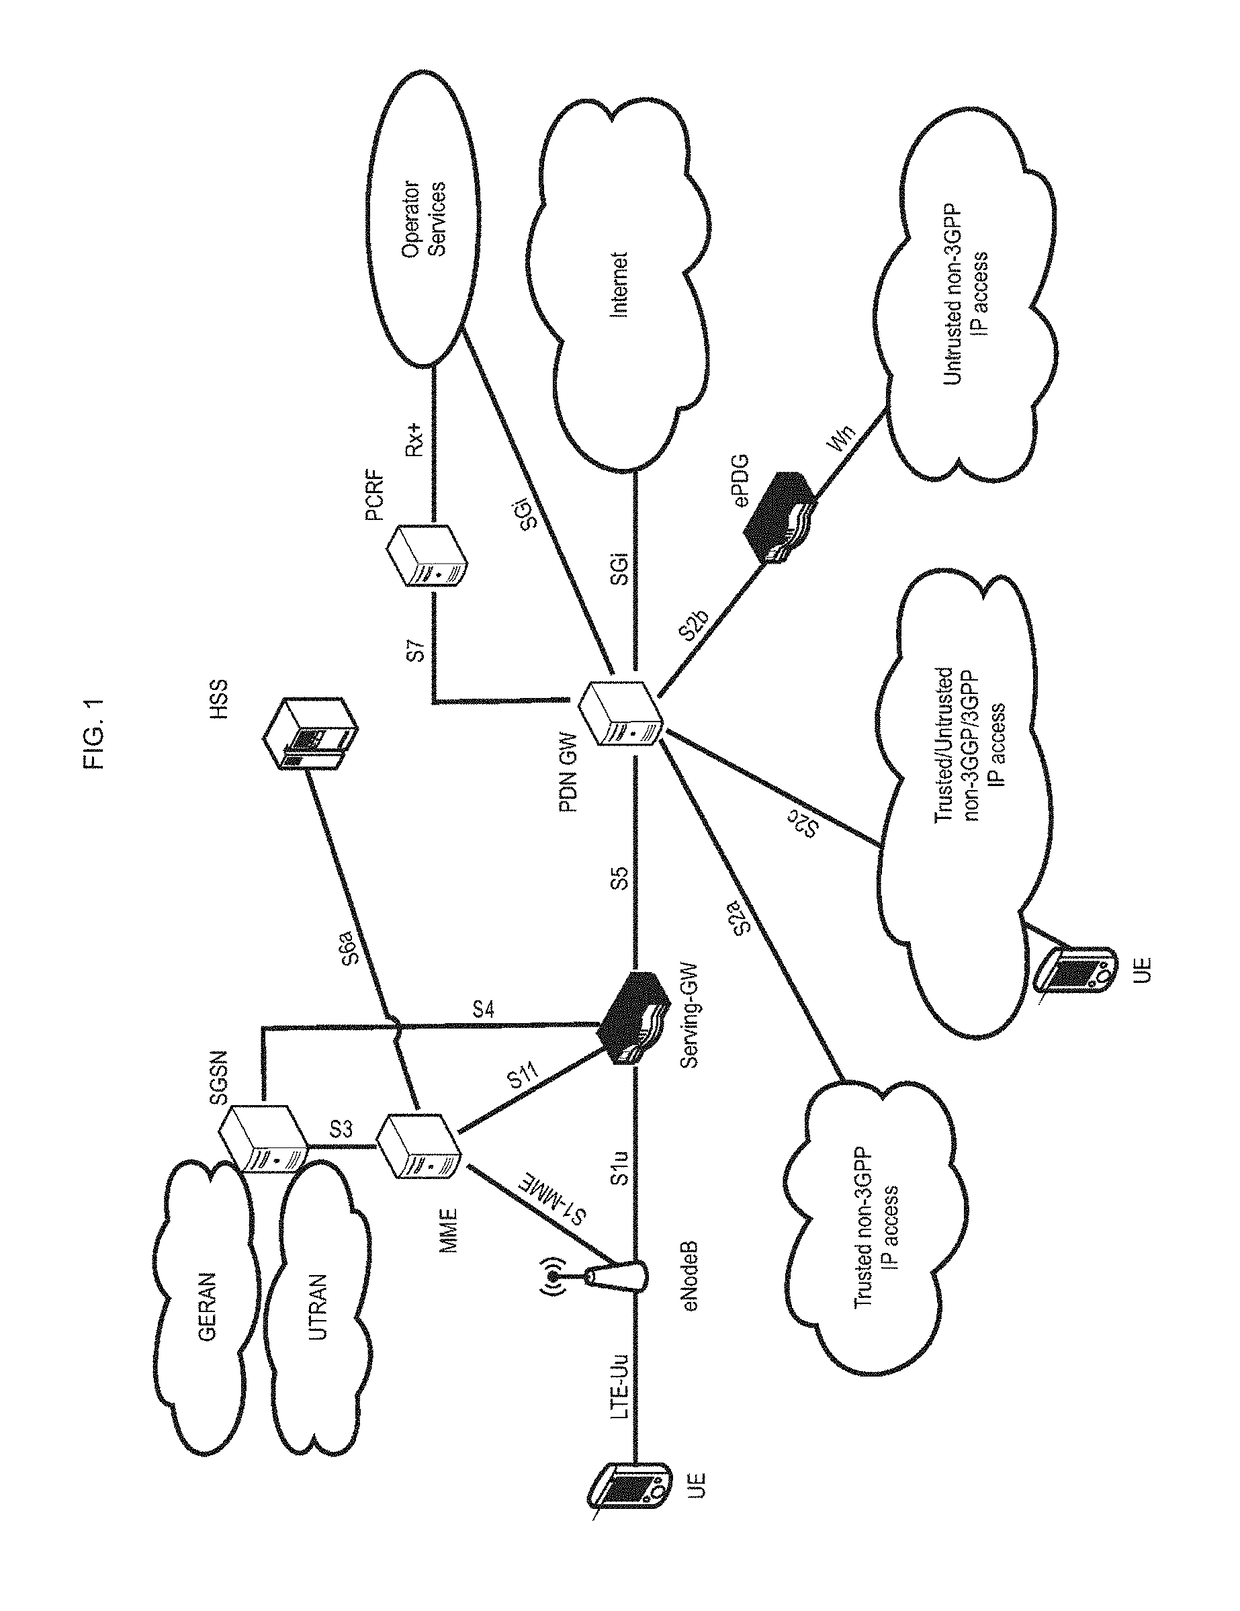 Physical downlink control channel, pdcch, assignment procedure